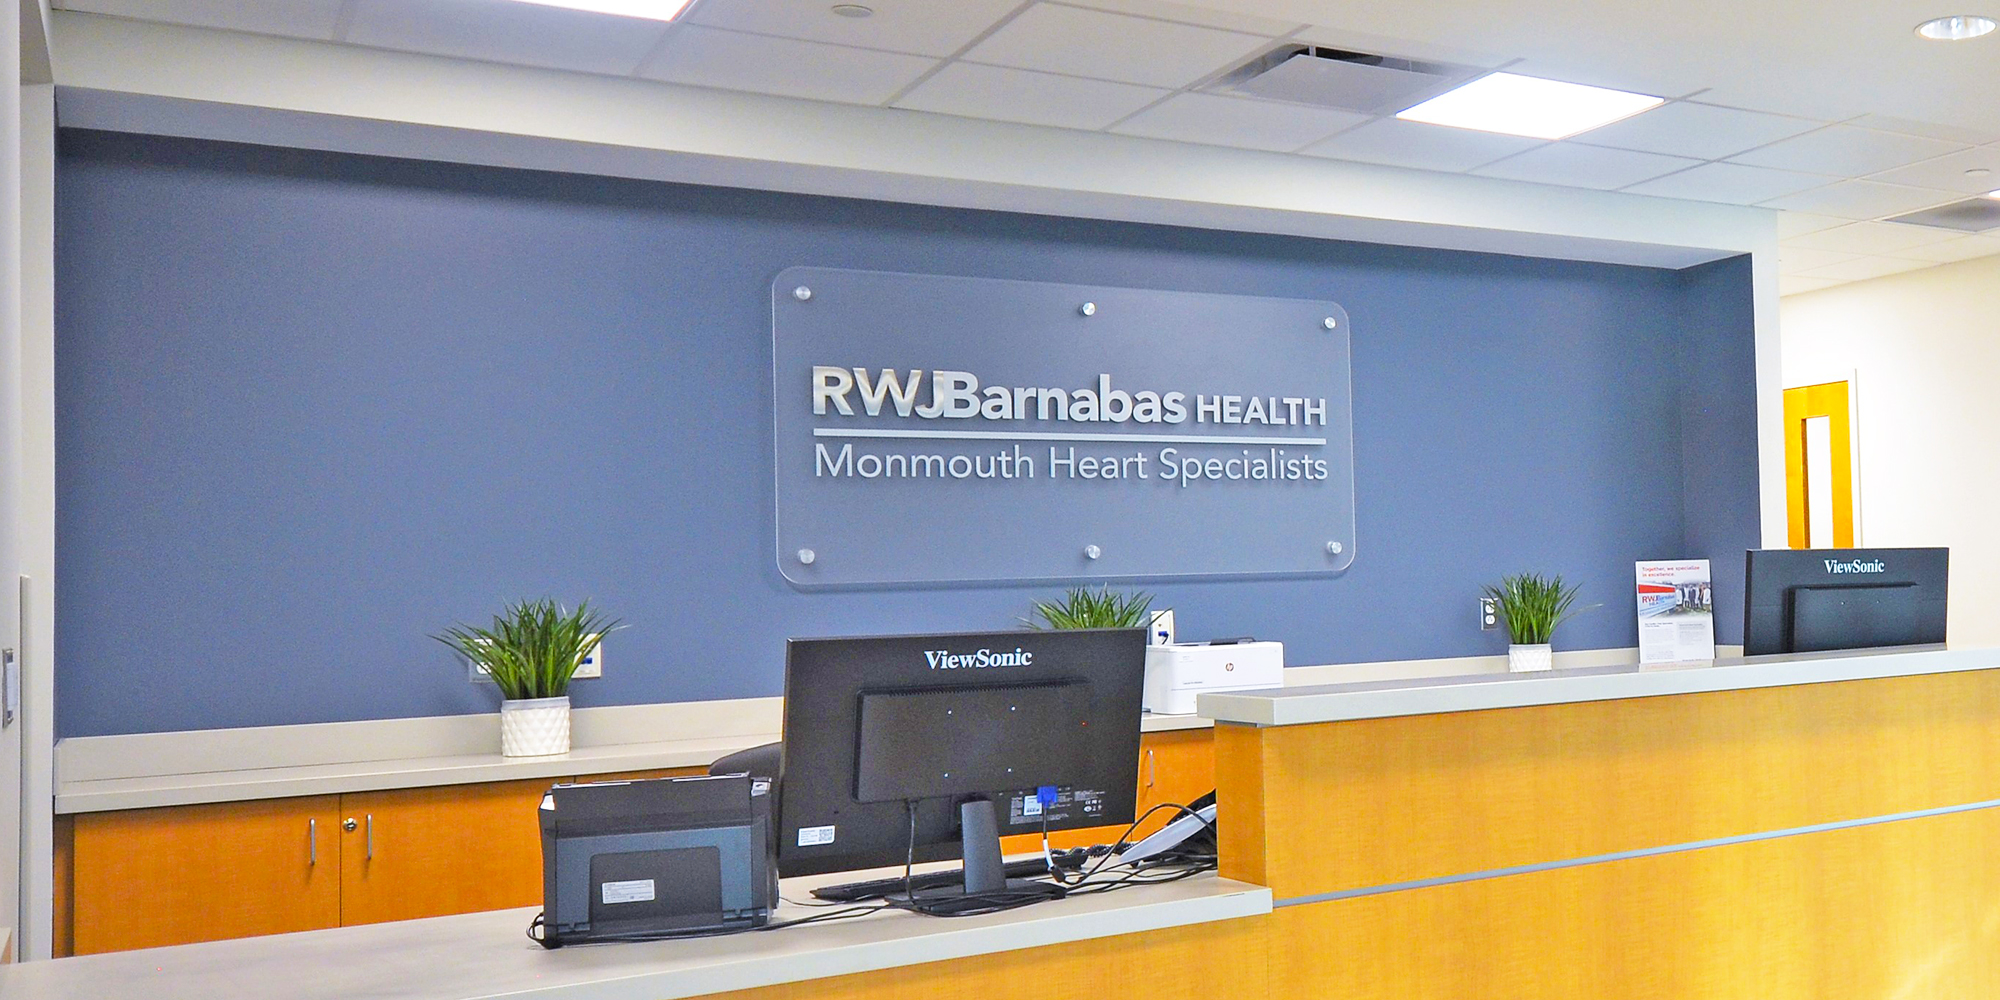 PROJECTS-1-RWJBH-MONMOUTH-HEART